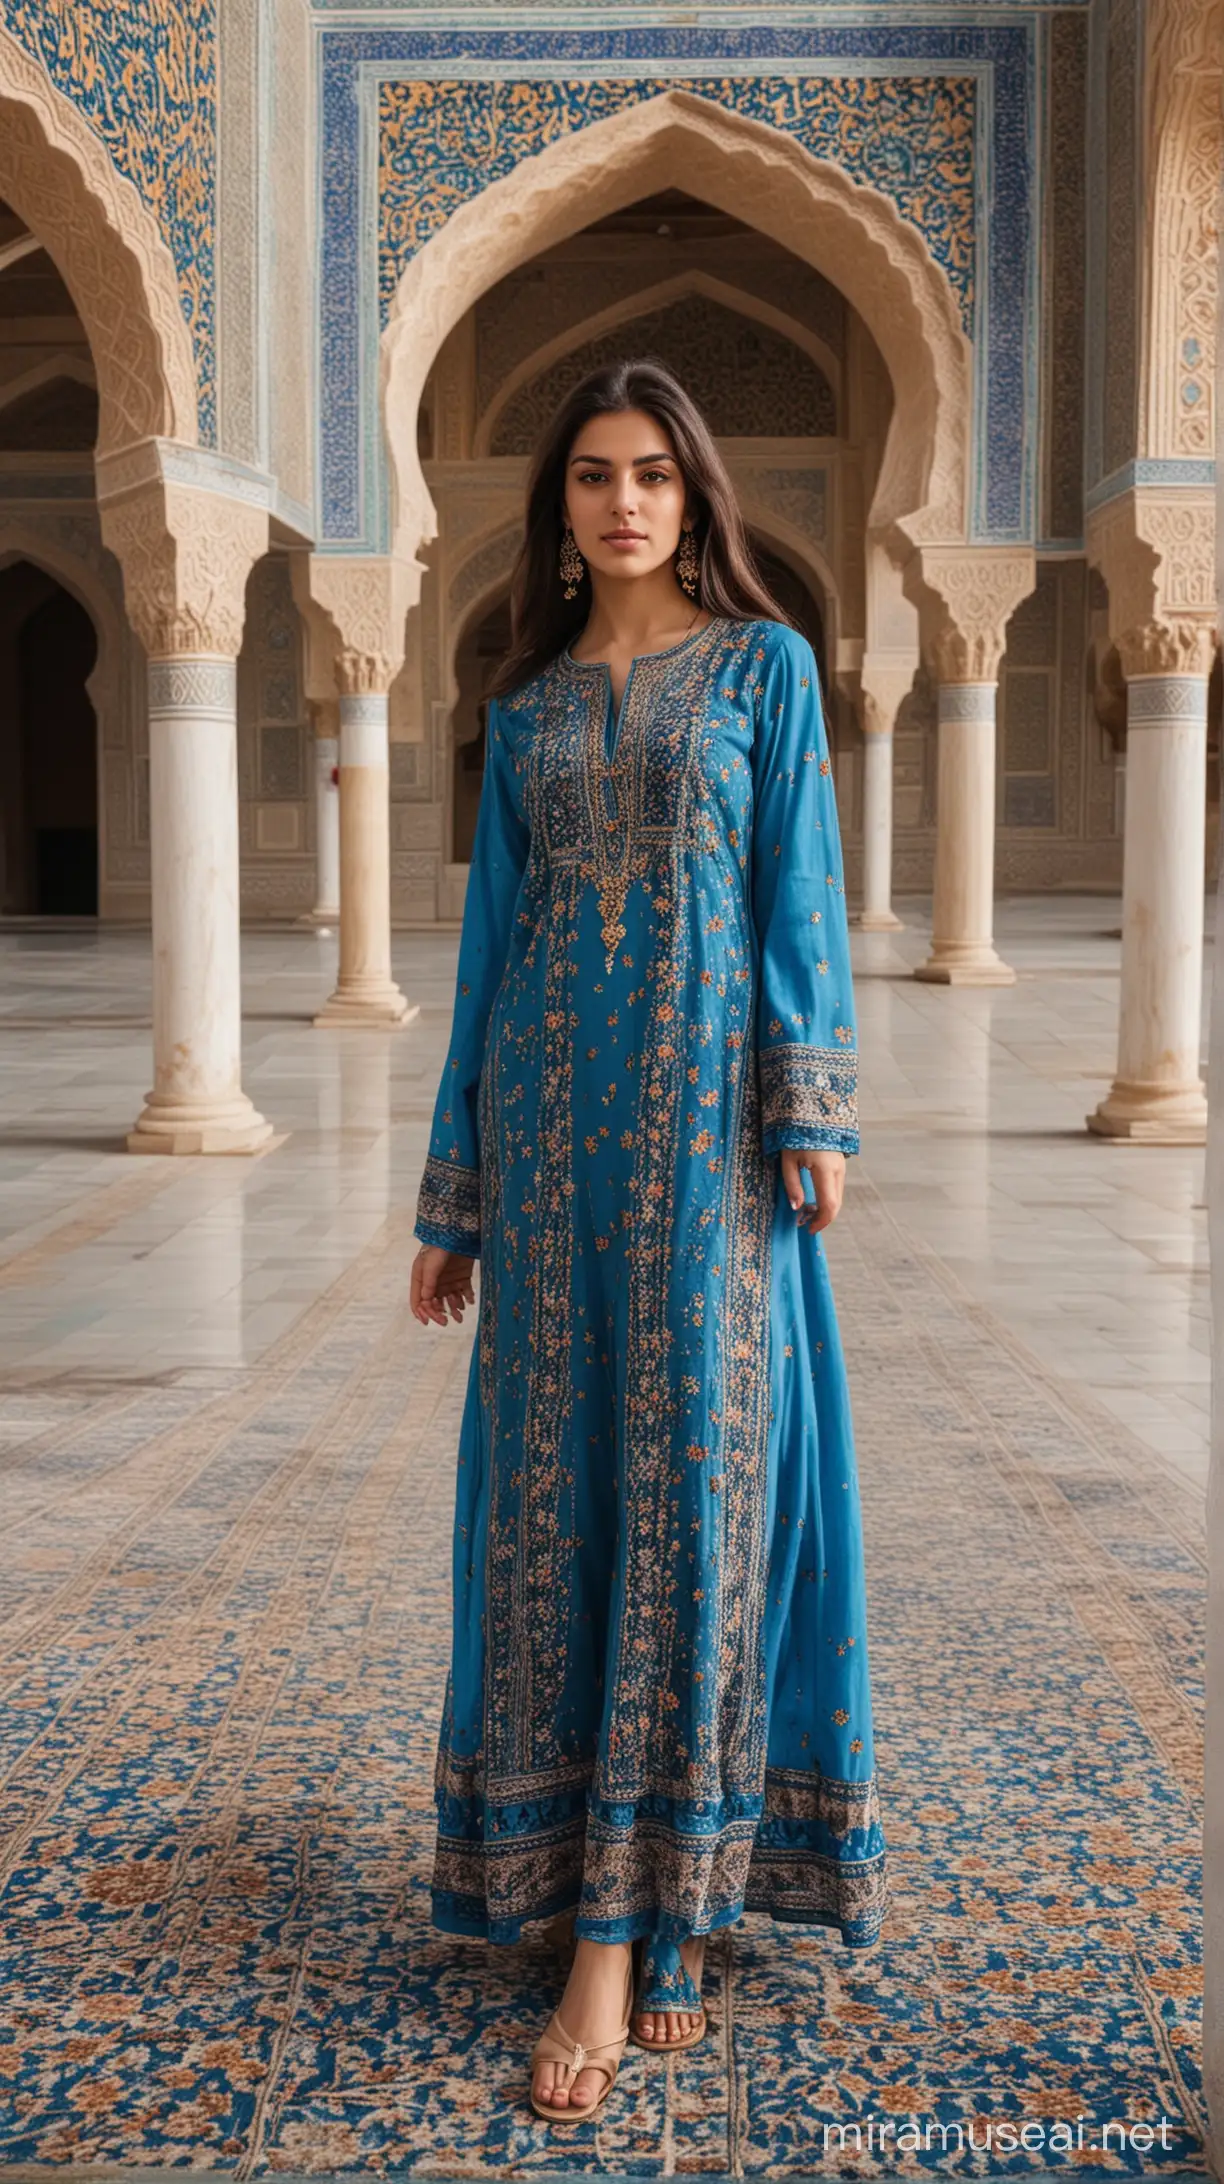 Persian Girl in Blue Dress at Iranian Mosque Courtyard